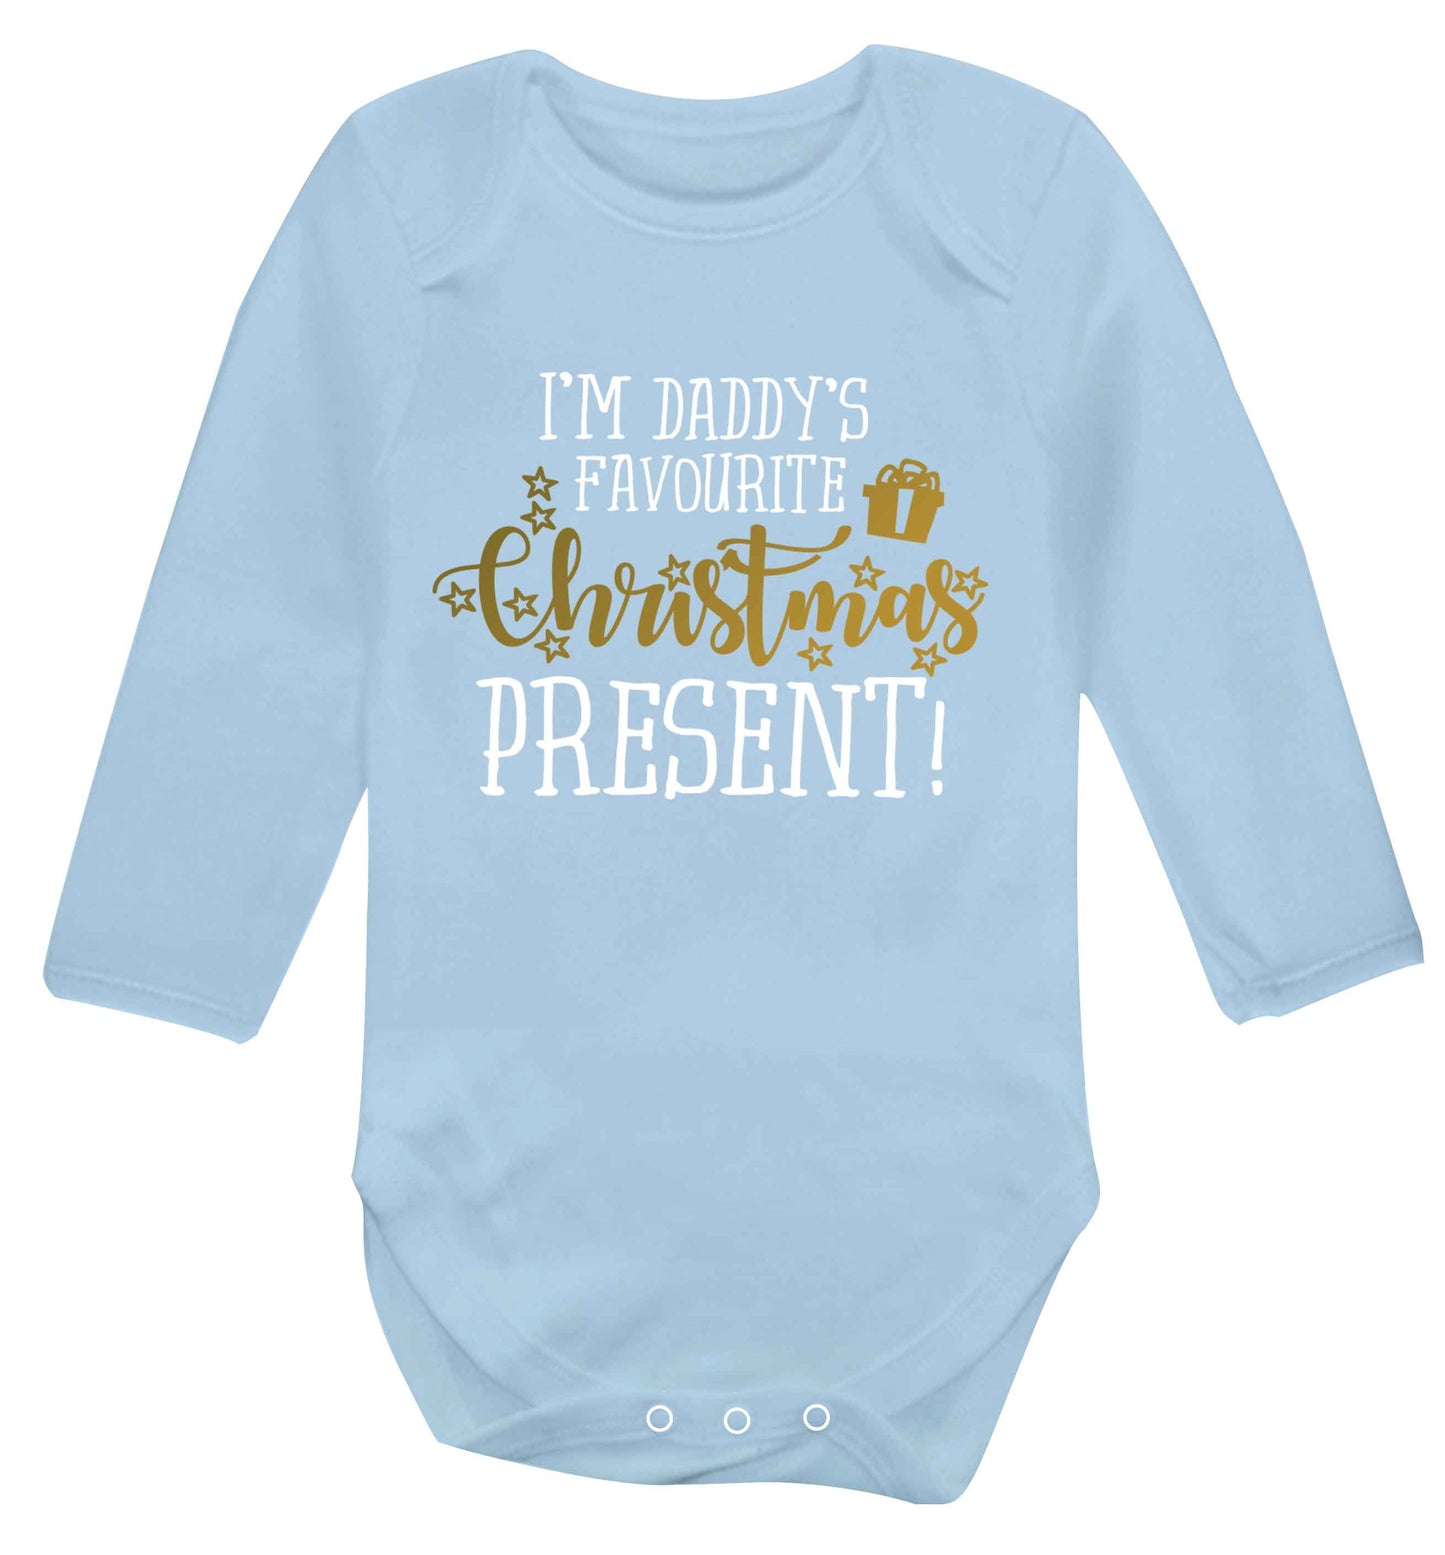 Daddy's favourite Christmas present Baby Vest long sleeved pale blue 6-12 months